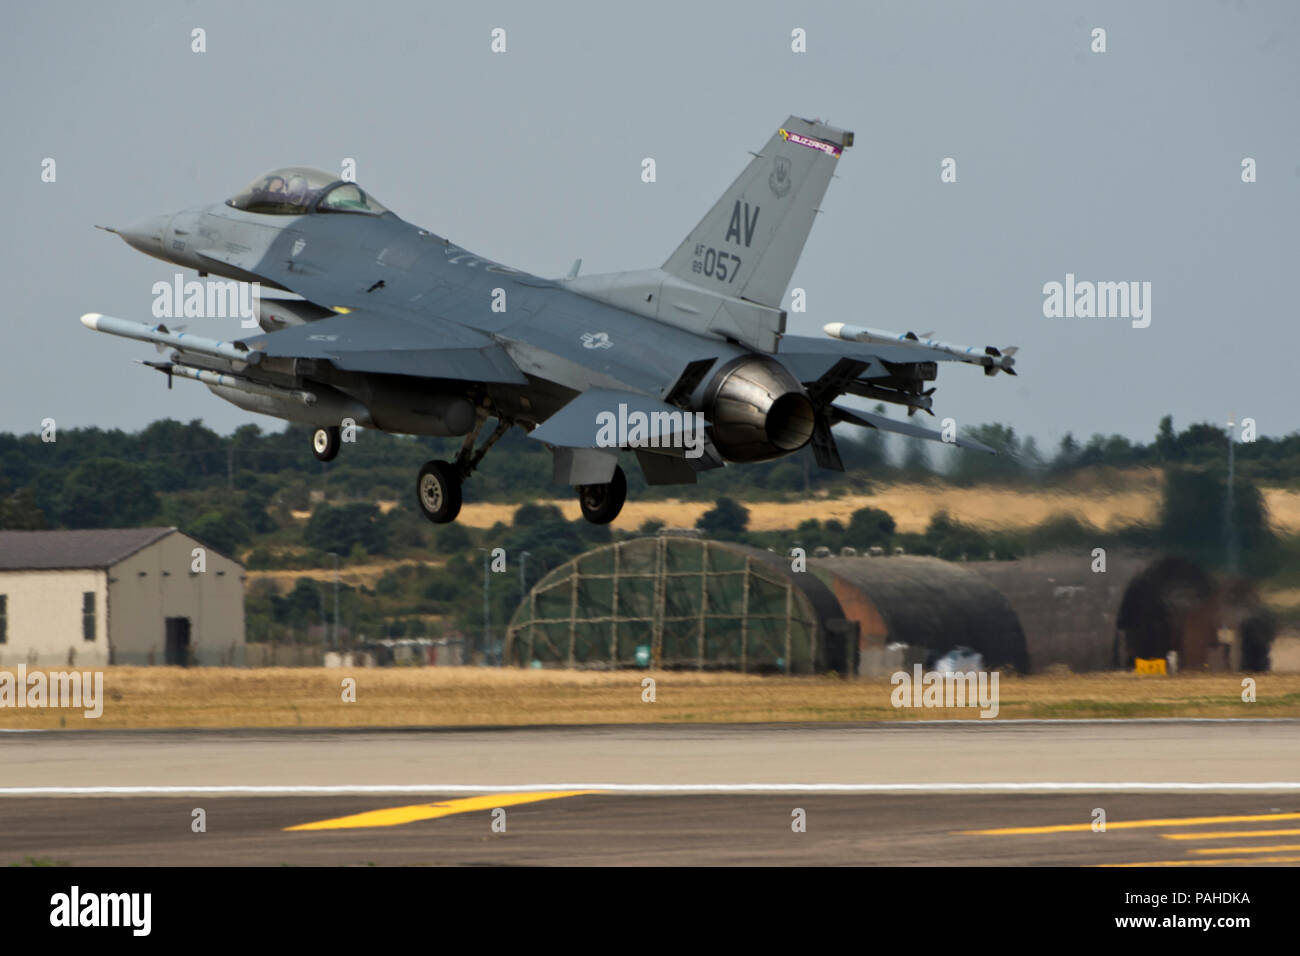 An F-16C Fighting Falcon from the 31st Fighter Wing, 510th Fighter Squadron, Aviano Air Base, Italy, lands at Royal Air Force Lakenheath, England, July 20, 2018. The 510th FS was originally formed as the 625th Bombardment Squadron (Dive), 405th Bombardment Group, at Drew Field, Fla., in 1943, flying the Douglas A-24 Banshee. (U.S. Air Force photo by Master Sgt. Eric Burks) Stock Photo